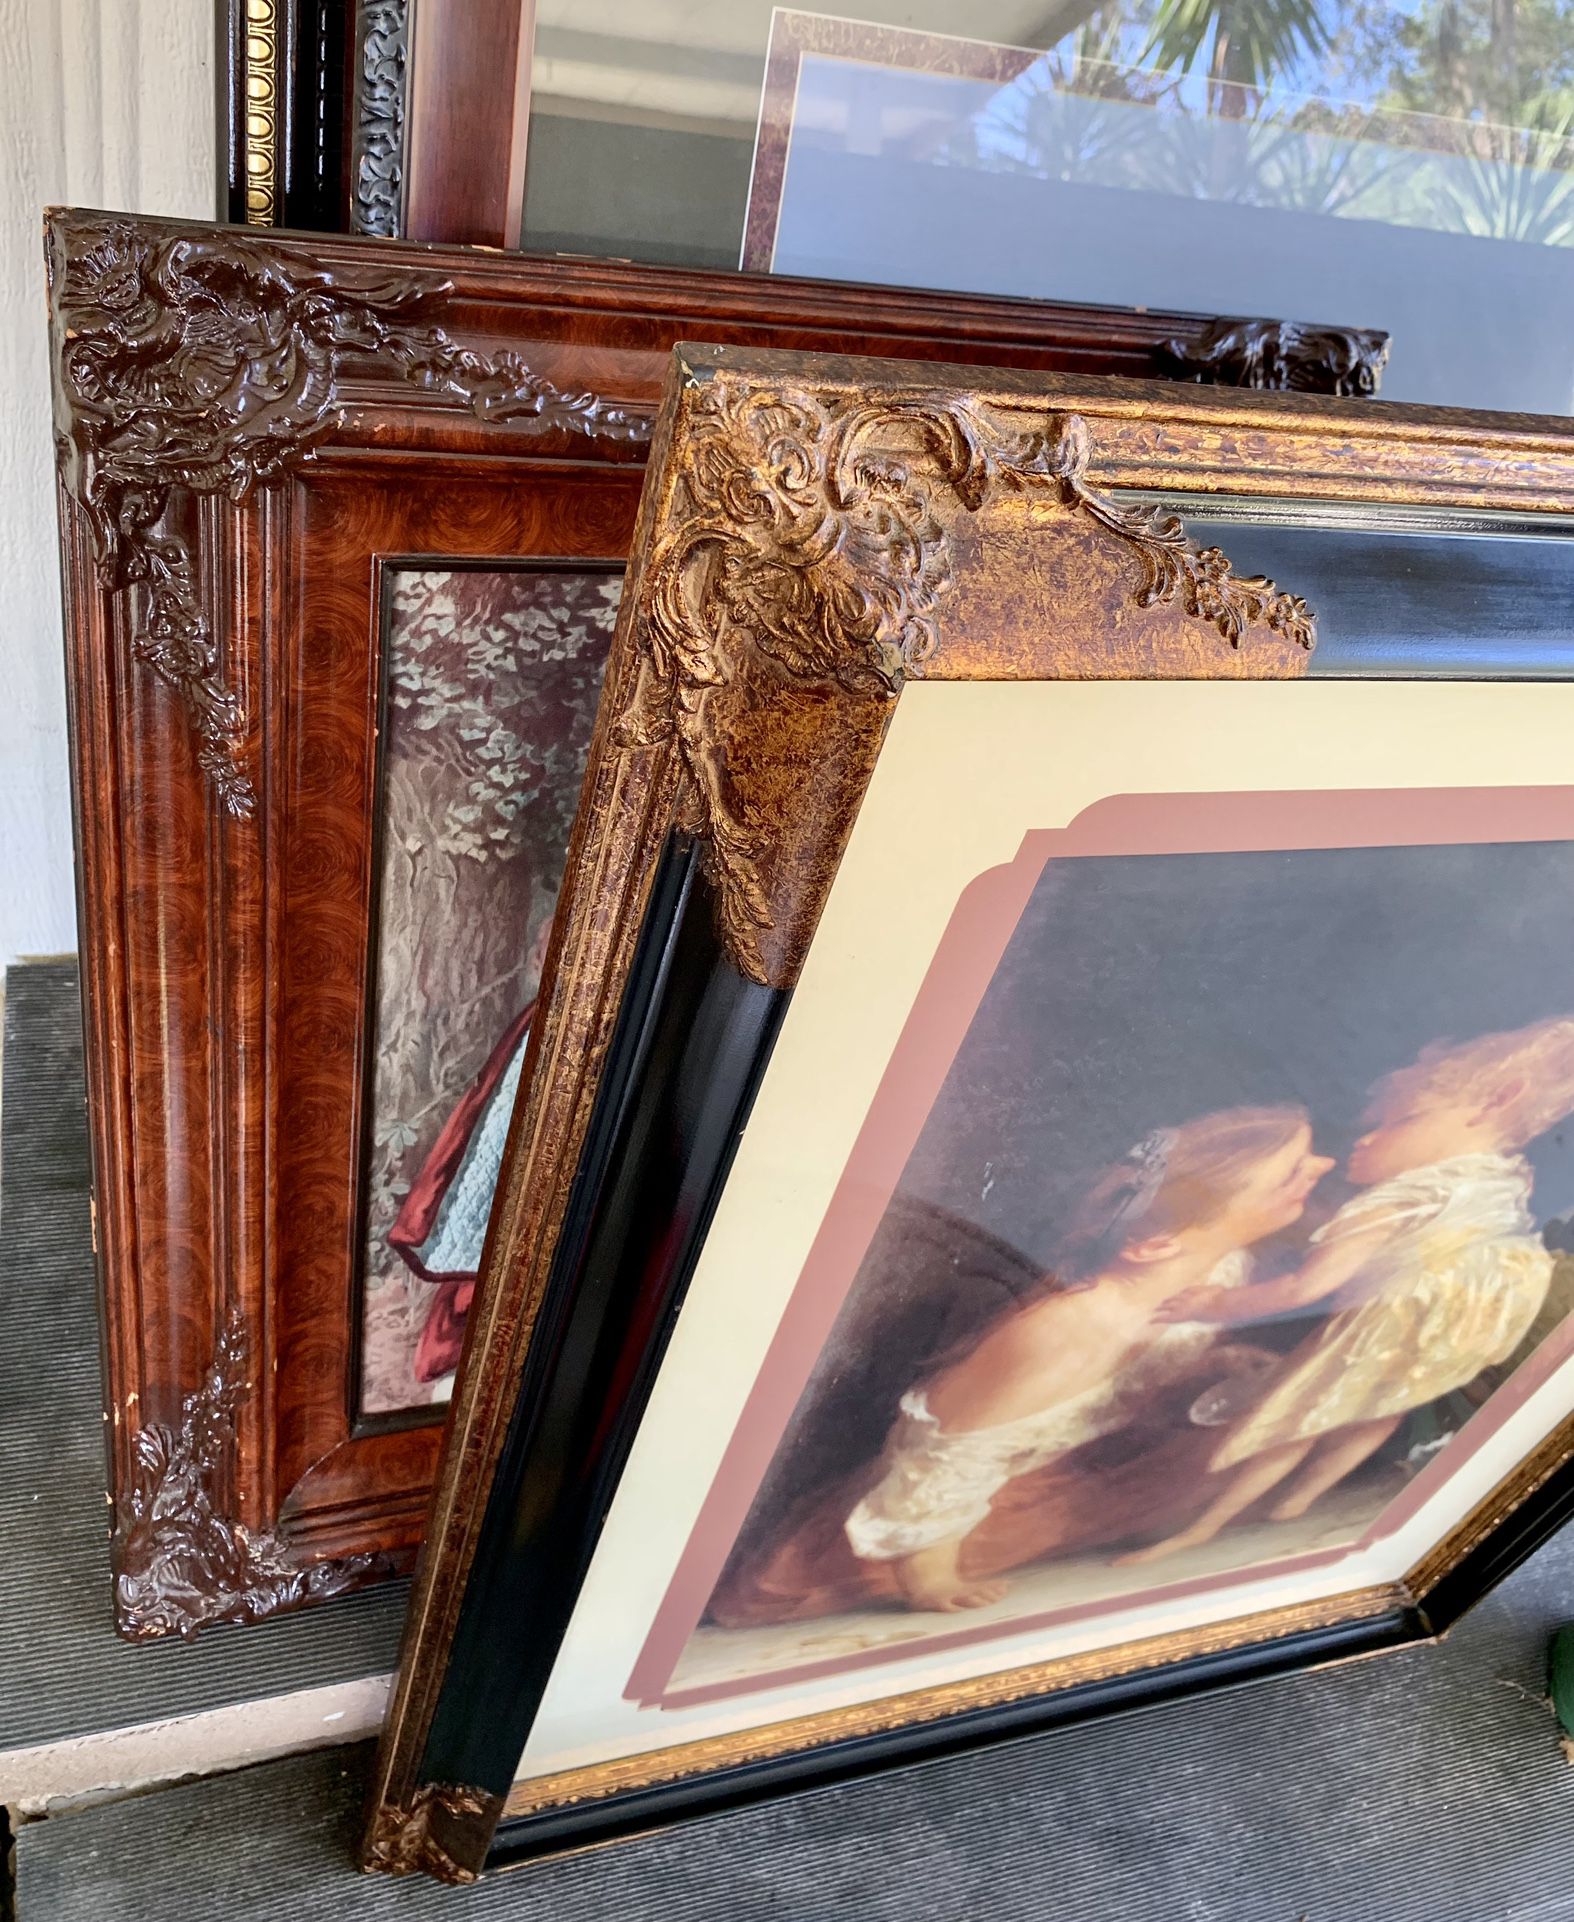 ANTIQUE FRAME COLLECTION (Prints Included) - Buy Individually OR Full Collection 